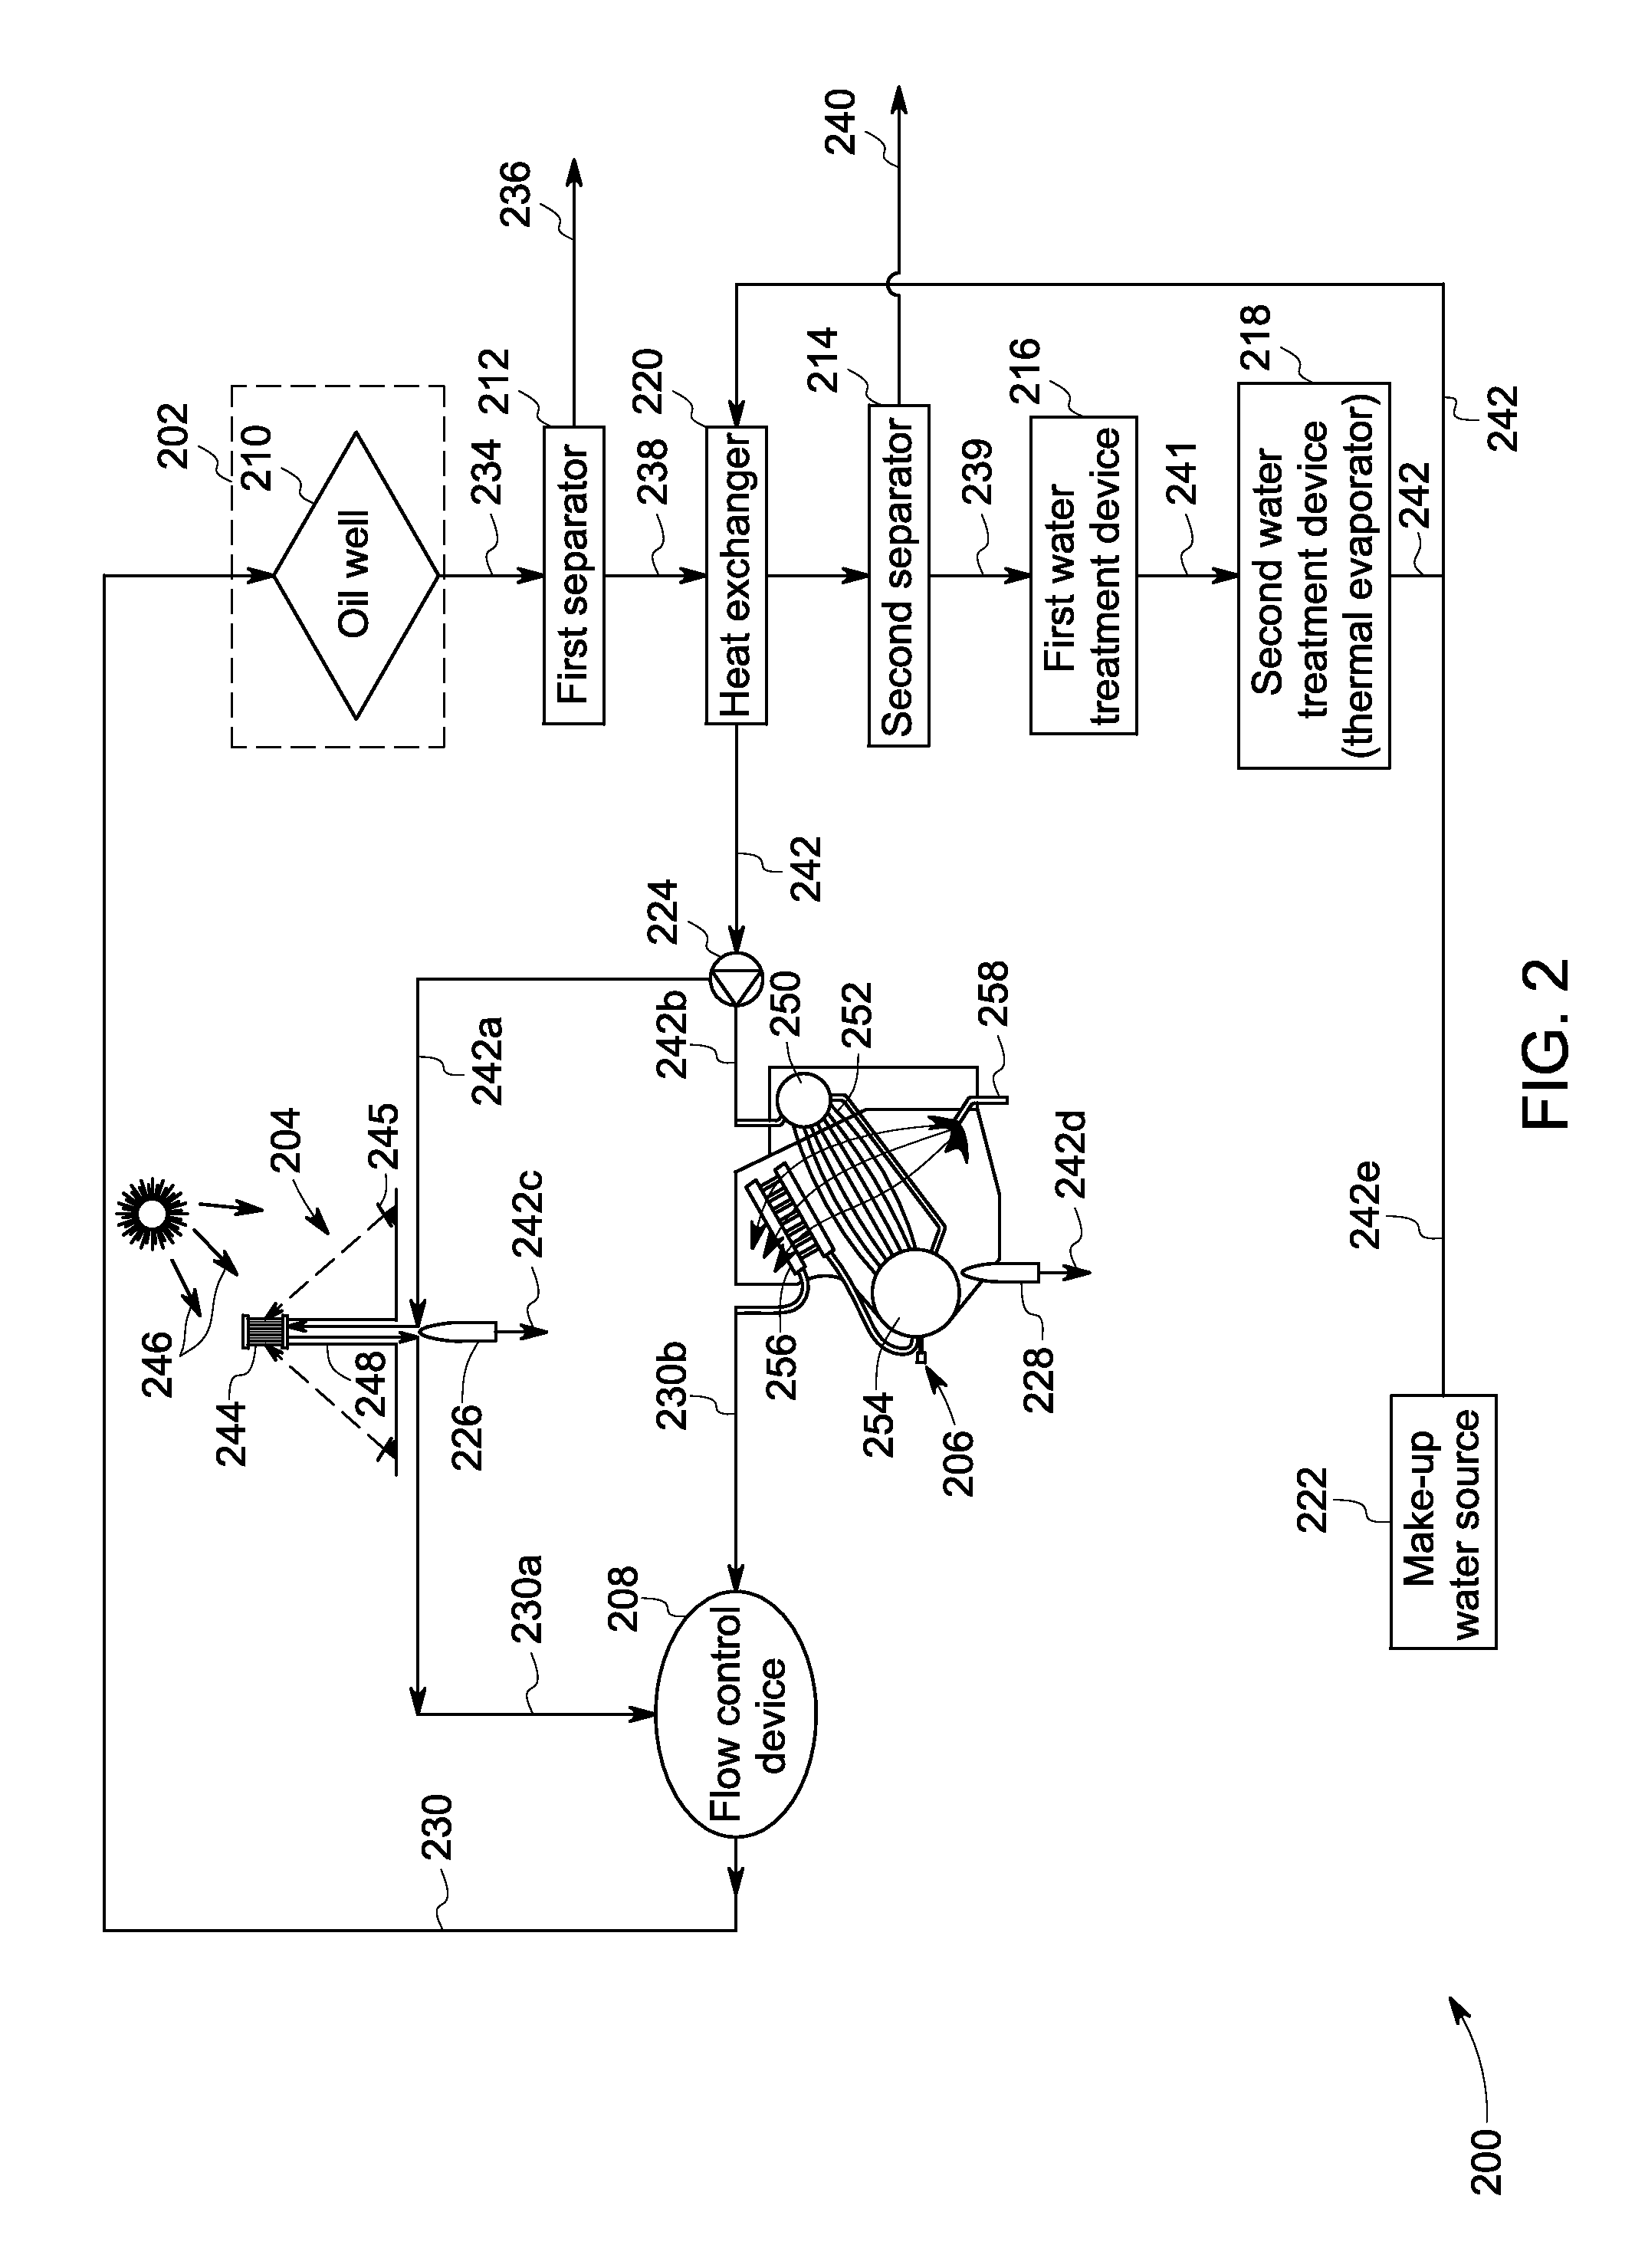 System and method for enhanced recovery of oil from an oil field